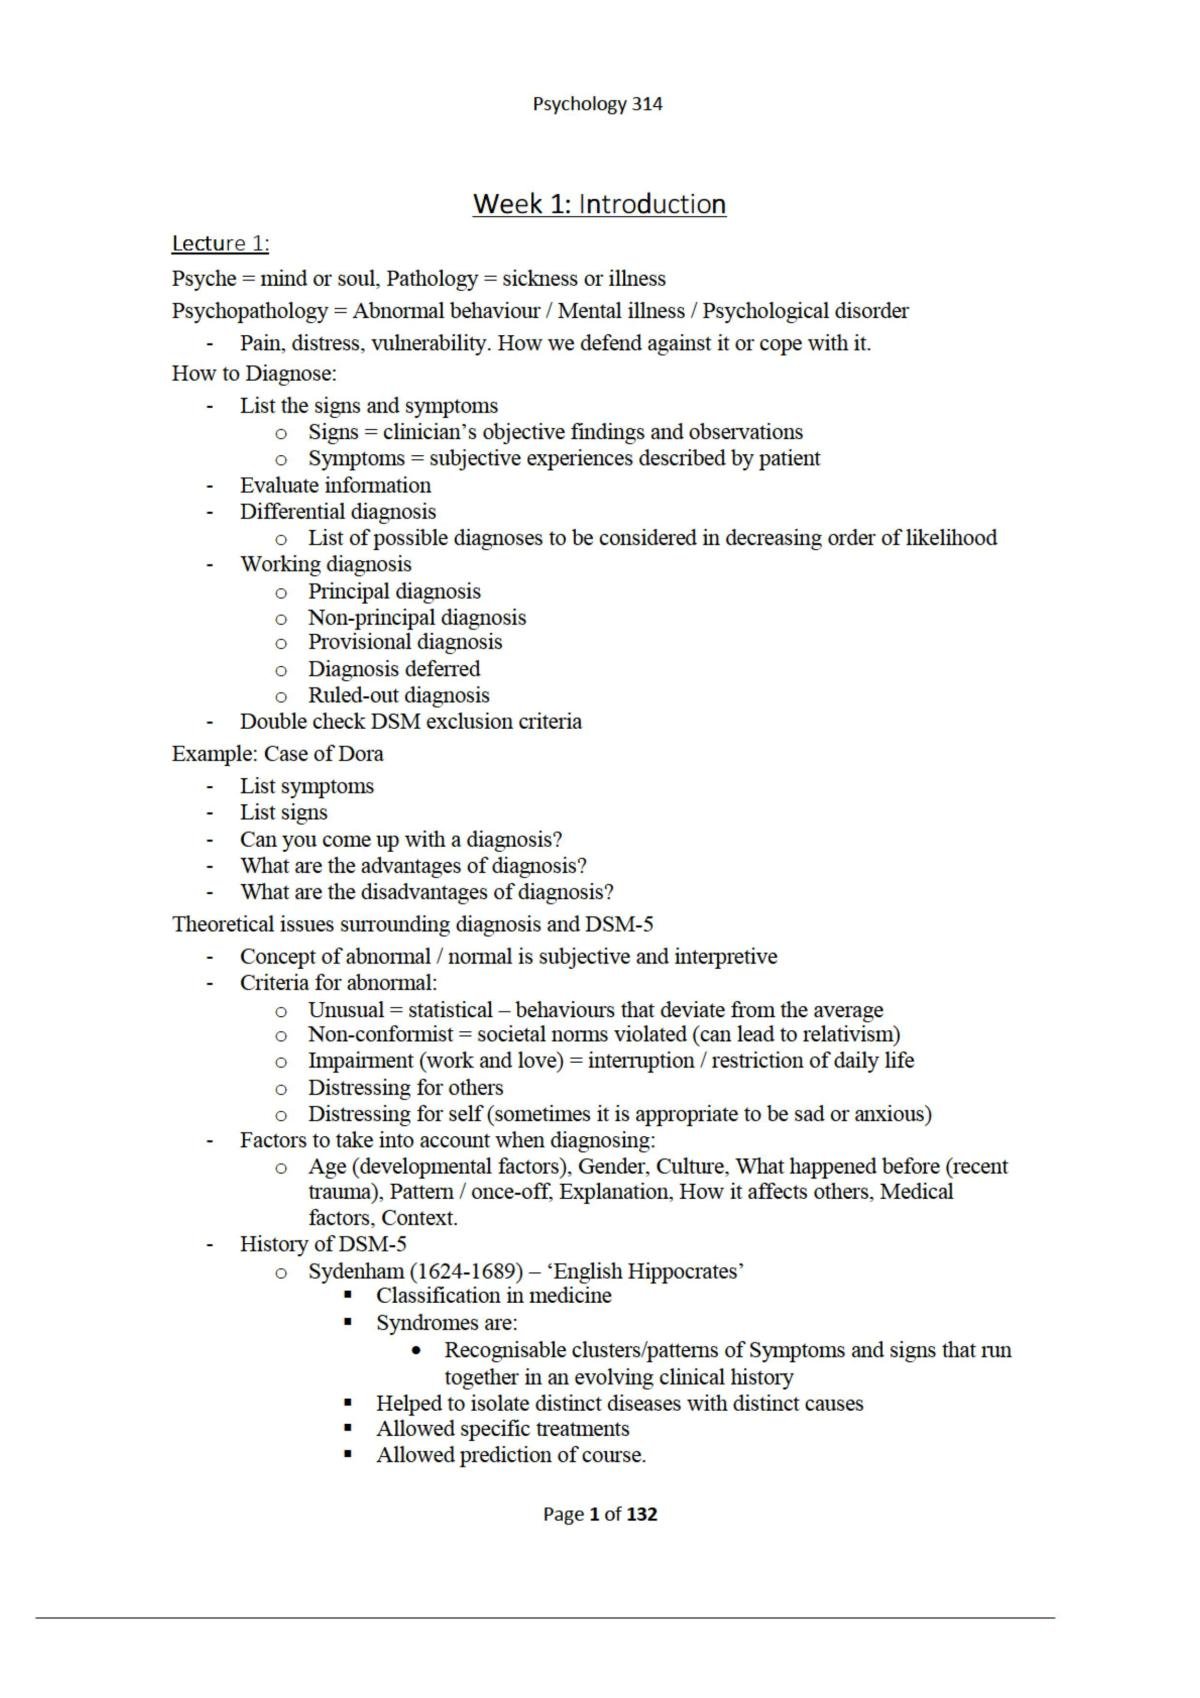 Psychology Course Summary - Page 1